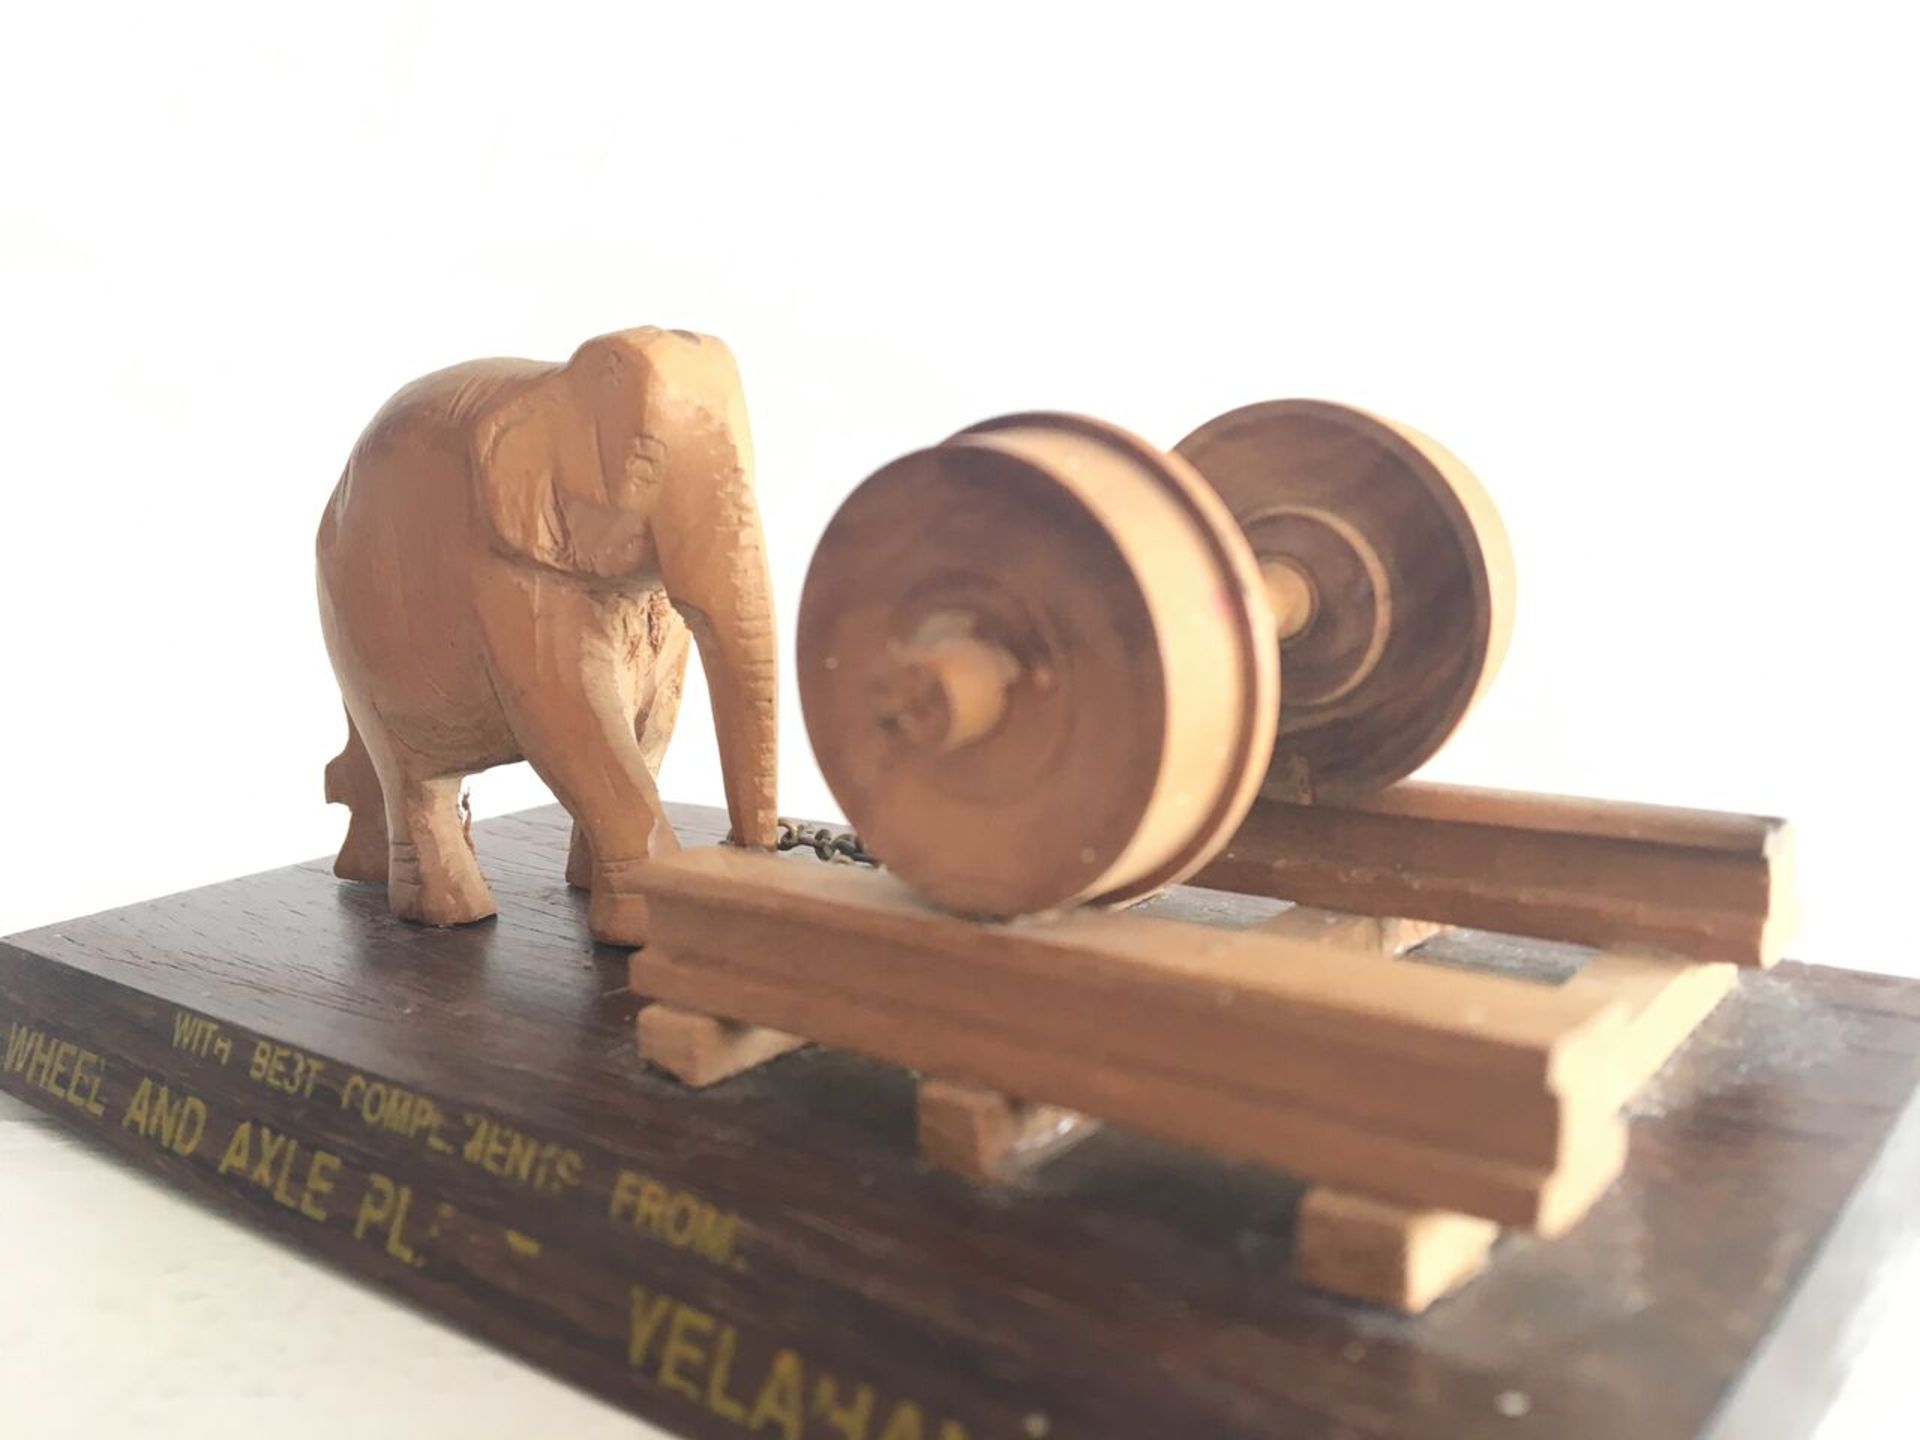 VINTAGE INDIAN TREEN CARVED WOOD ELEPHANT TROPHY - ADVERTISING - COMPLIMENTS FROM WHEEL AND AXLE